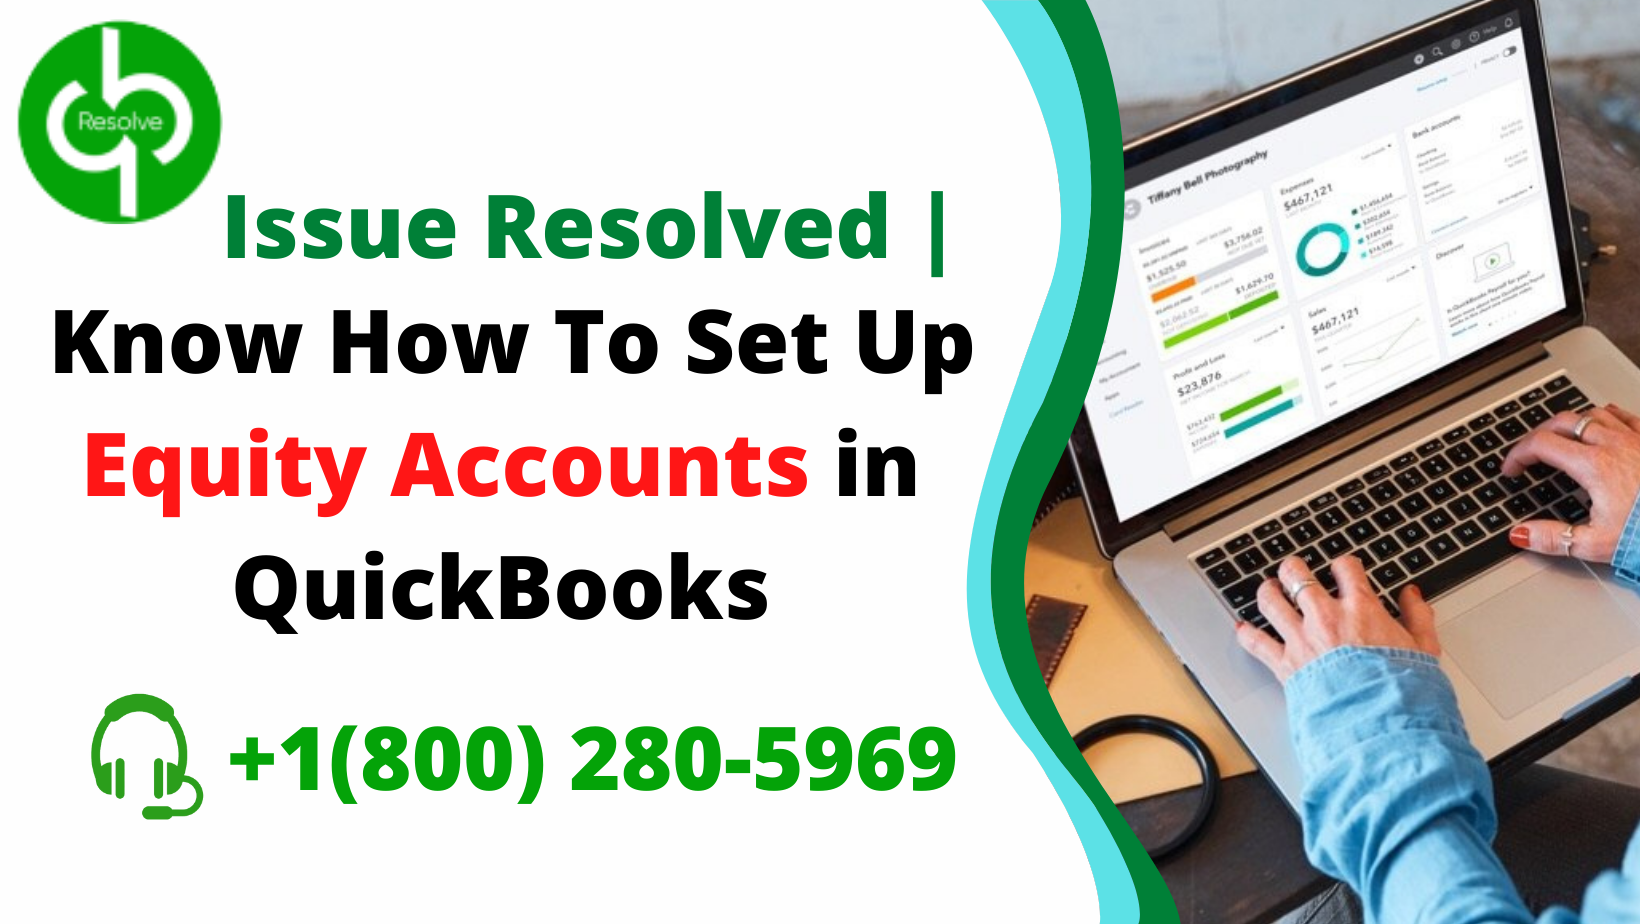 This vlog will guide your problems related to Equity accounts in QuickBooks